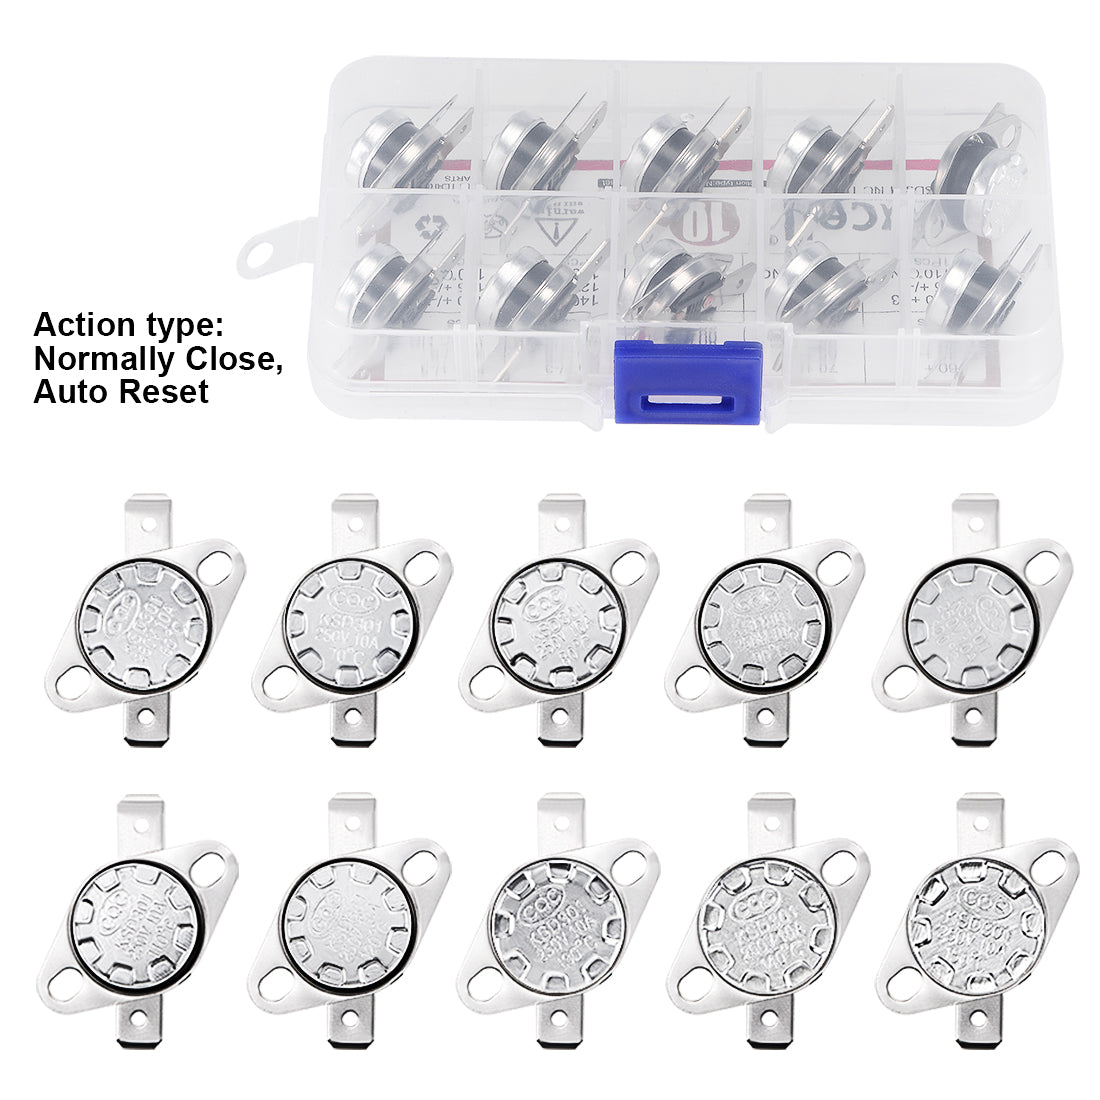 uxcell Uxcell 10pcs NC KSD301 Thermostat 60-150°C(140-302℉) Temperature Thermal Control Switch 60 70 80 90 100 110 120 130 140 150°C Normally Close Assortment Kit